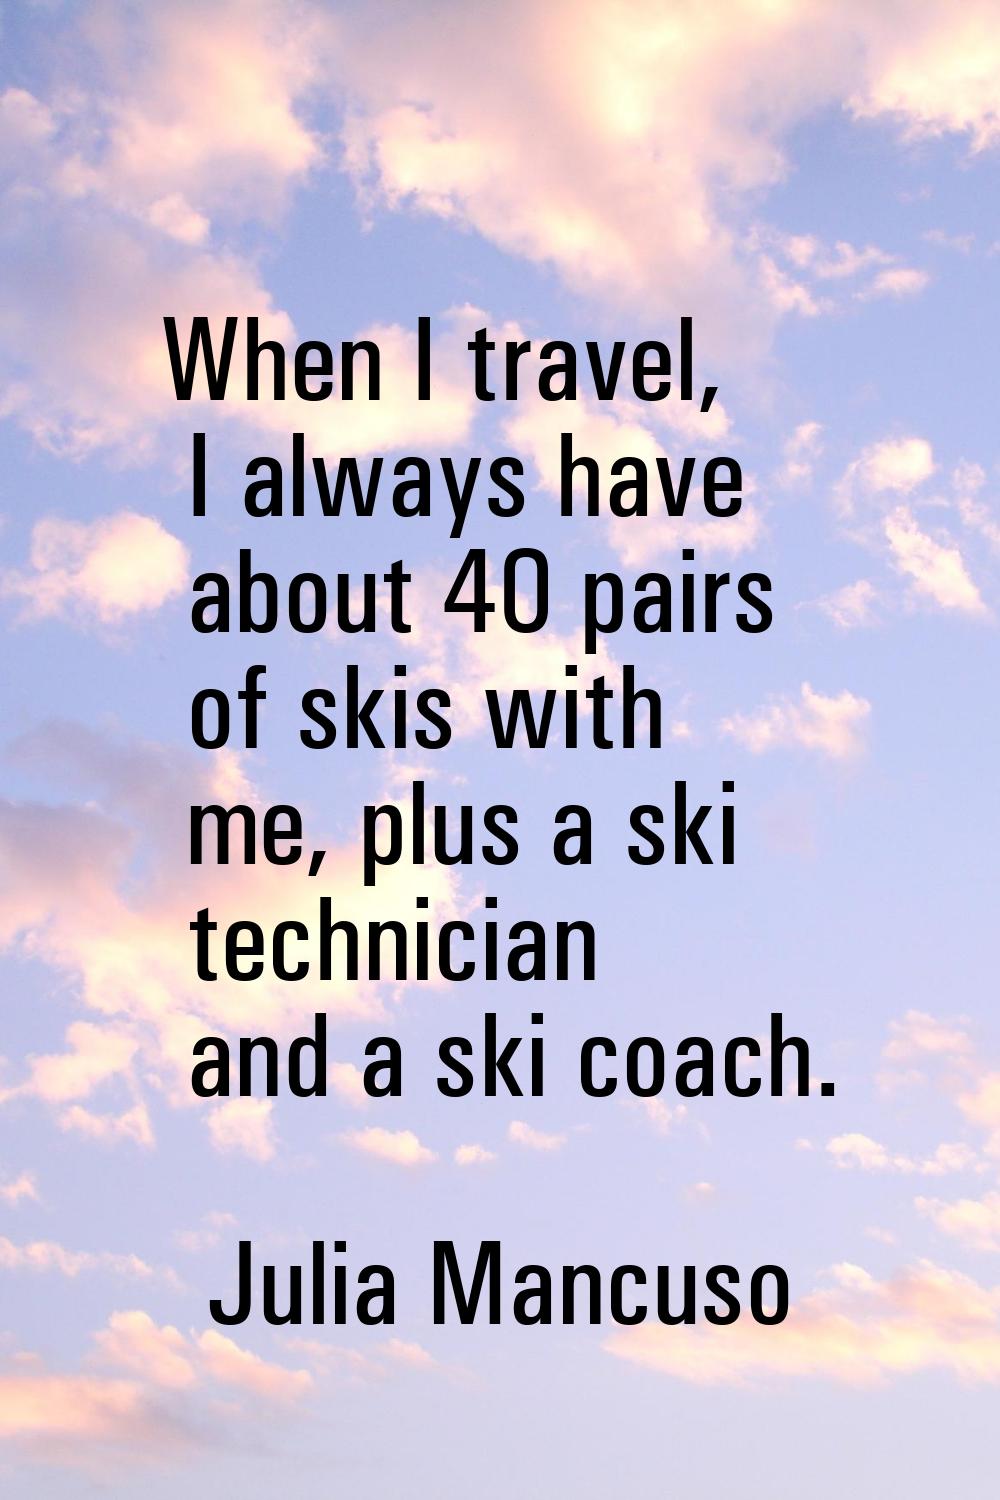 When I travel, I always have about 40 pairs of skis with me, plus a ski technician and a ski coach.